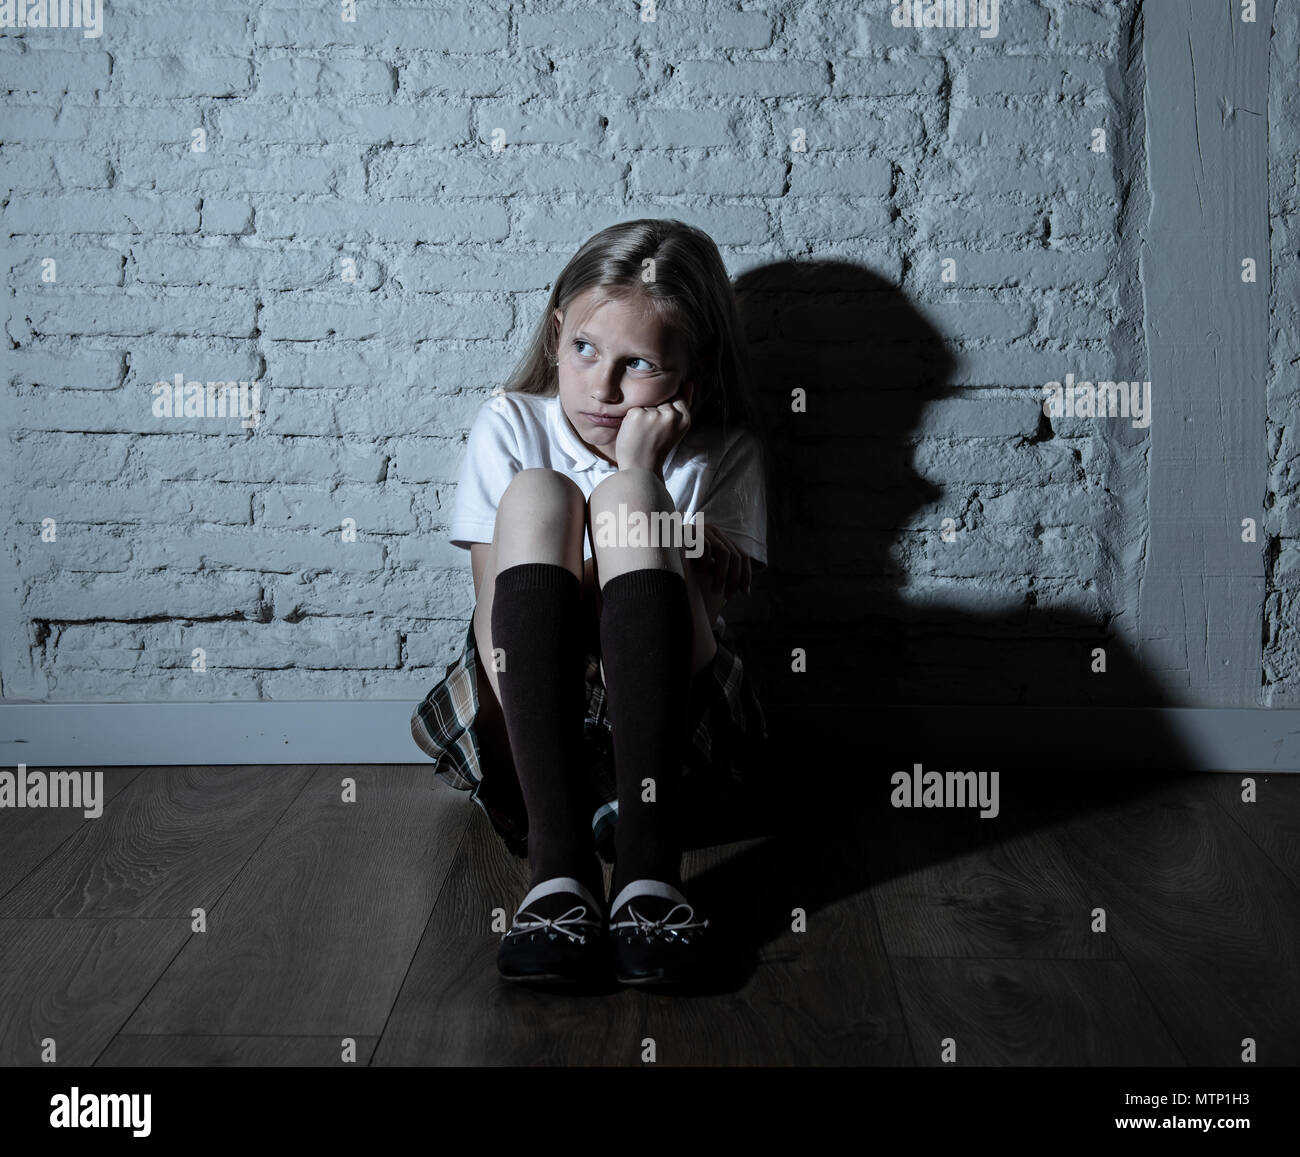 Sad desperate young girl suffering from bulling and harassment felling lonely, unhappy desperate and hopeless sitting against the wall, dark light. Sc Stock Photo